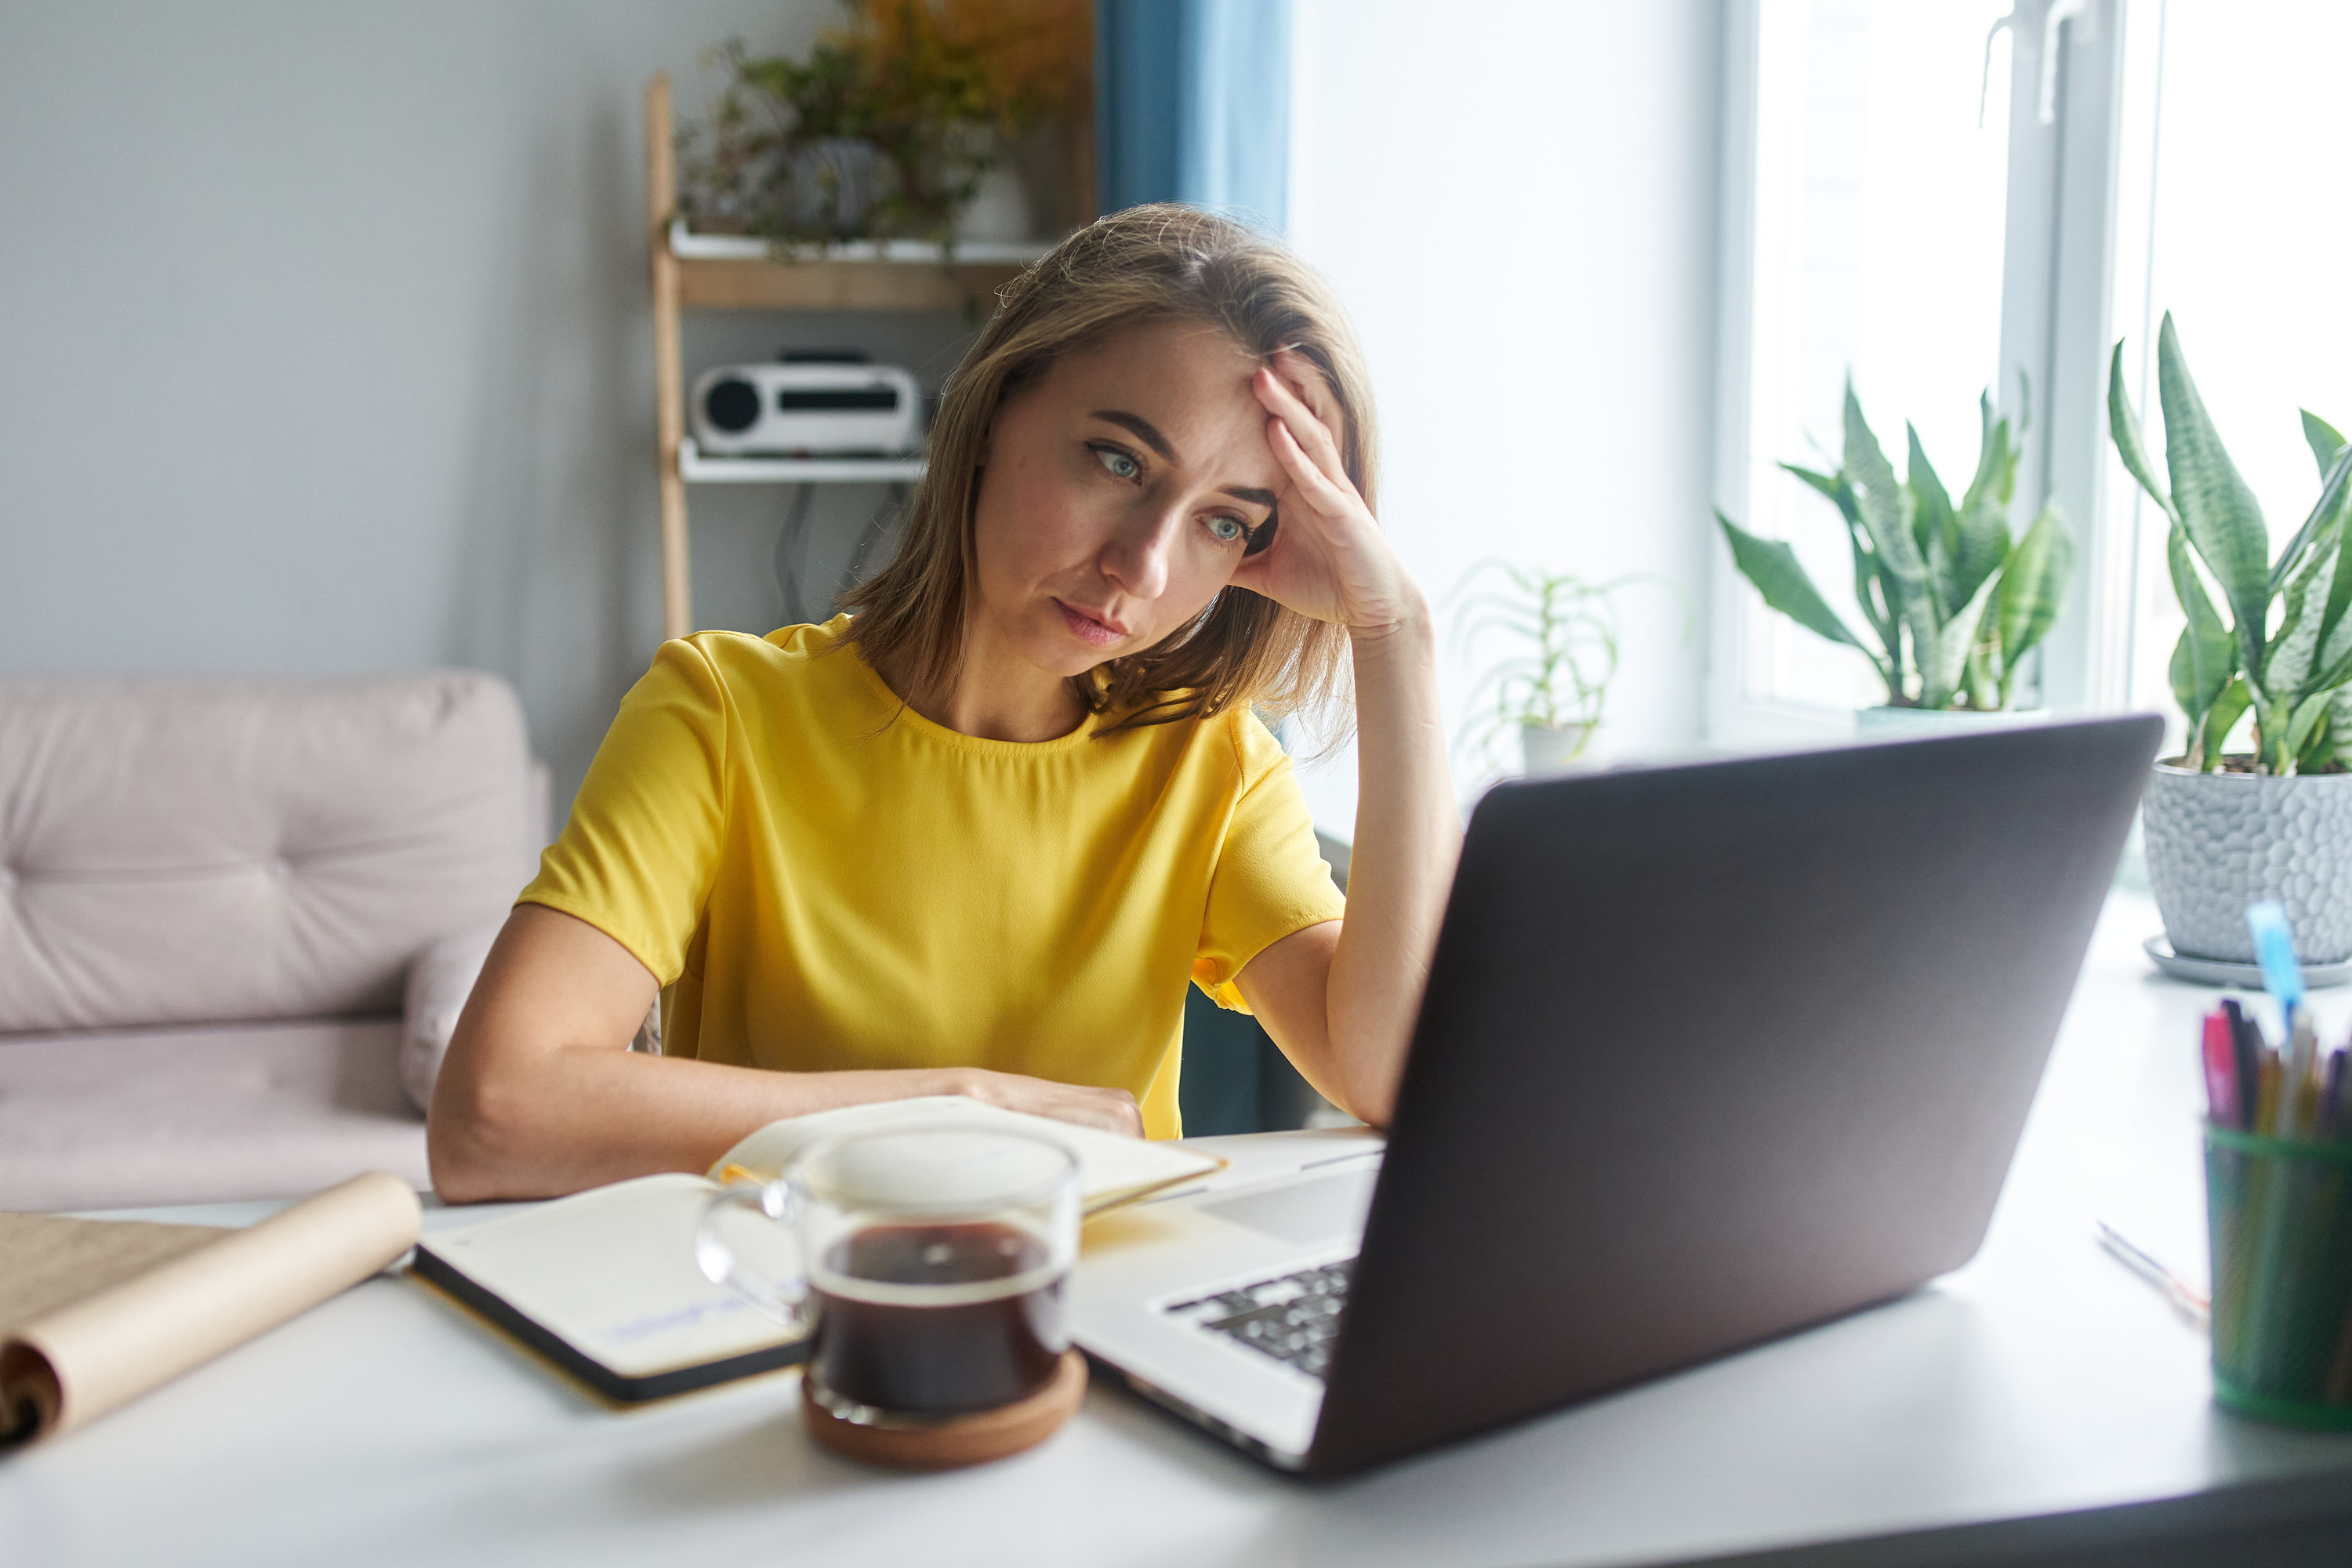 A woman looks stressed out while she stares at her laptop